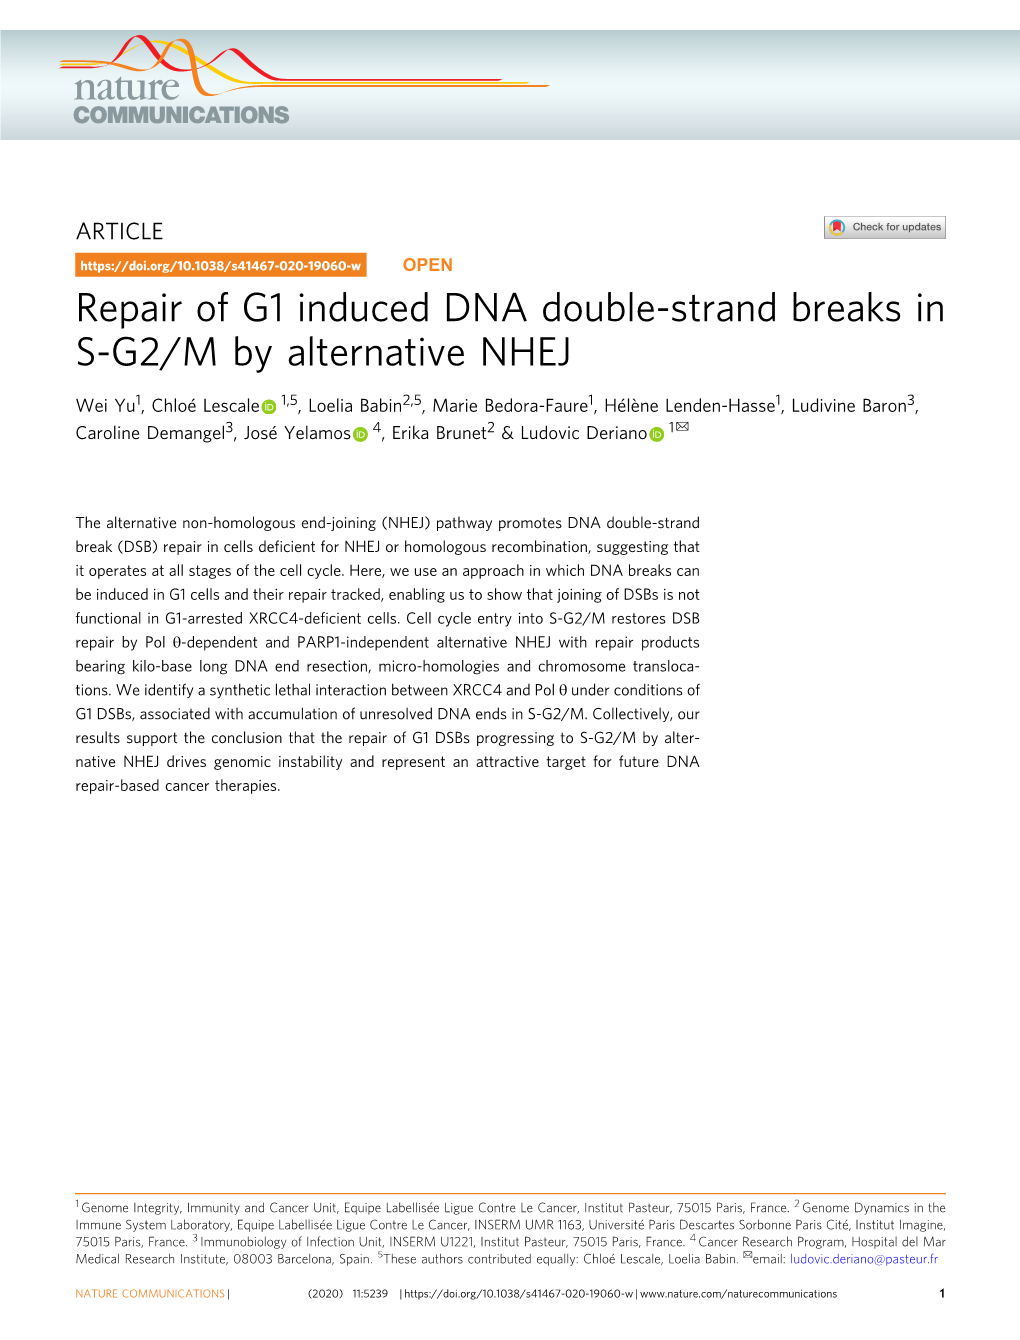 Repair of G1 Induced DNA Double-Strand Breaks in S-G2/M by Alternative NHEJ